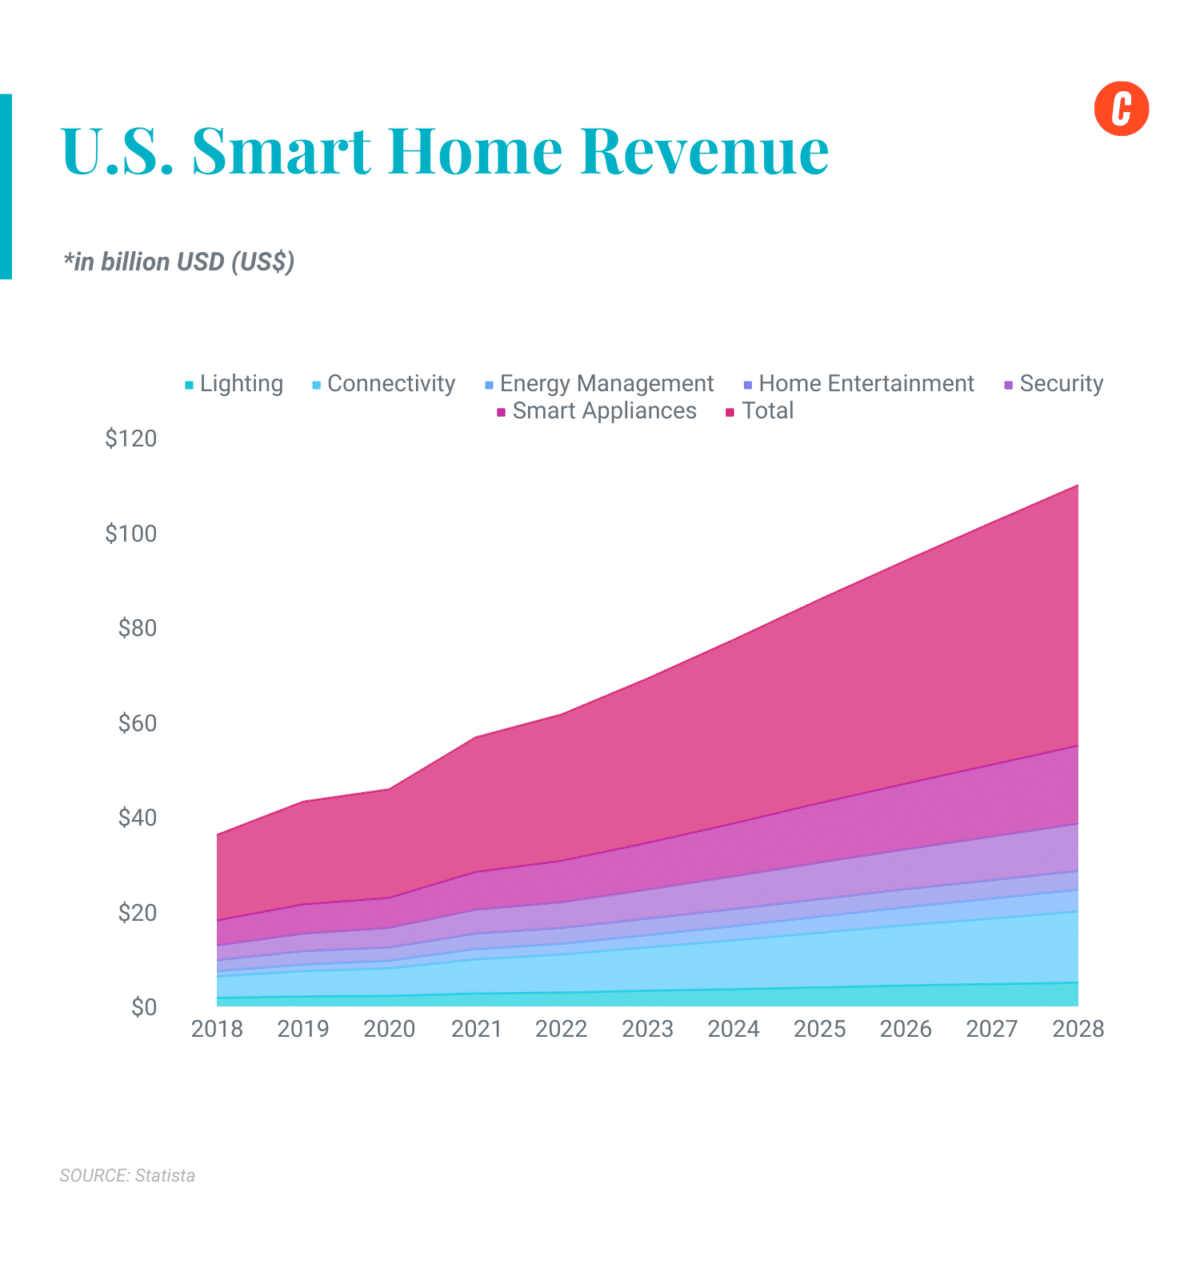 U.S. Smart Home Revenue, outlined in billions of USD. It's predicted to surpass $100bn by 2028.